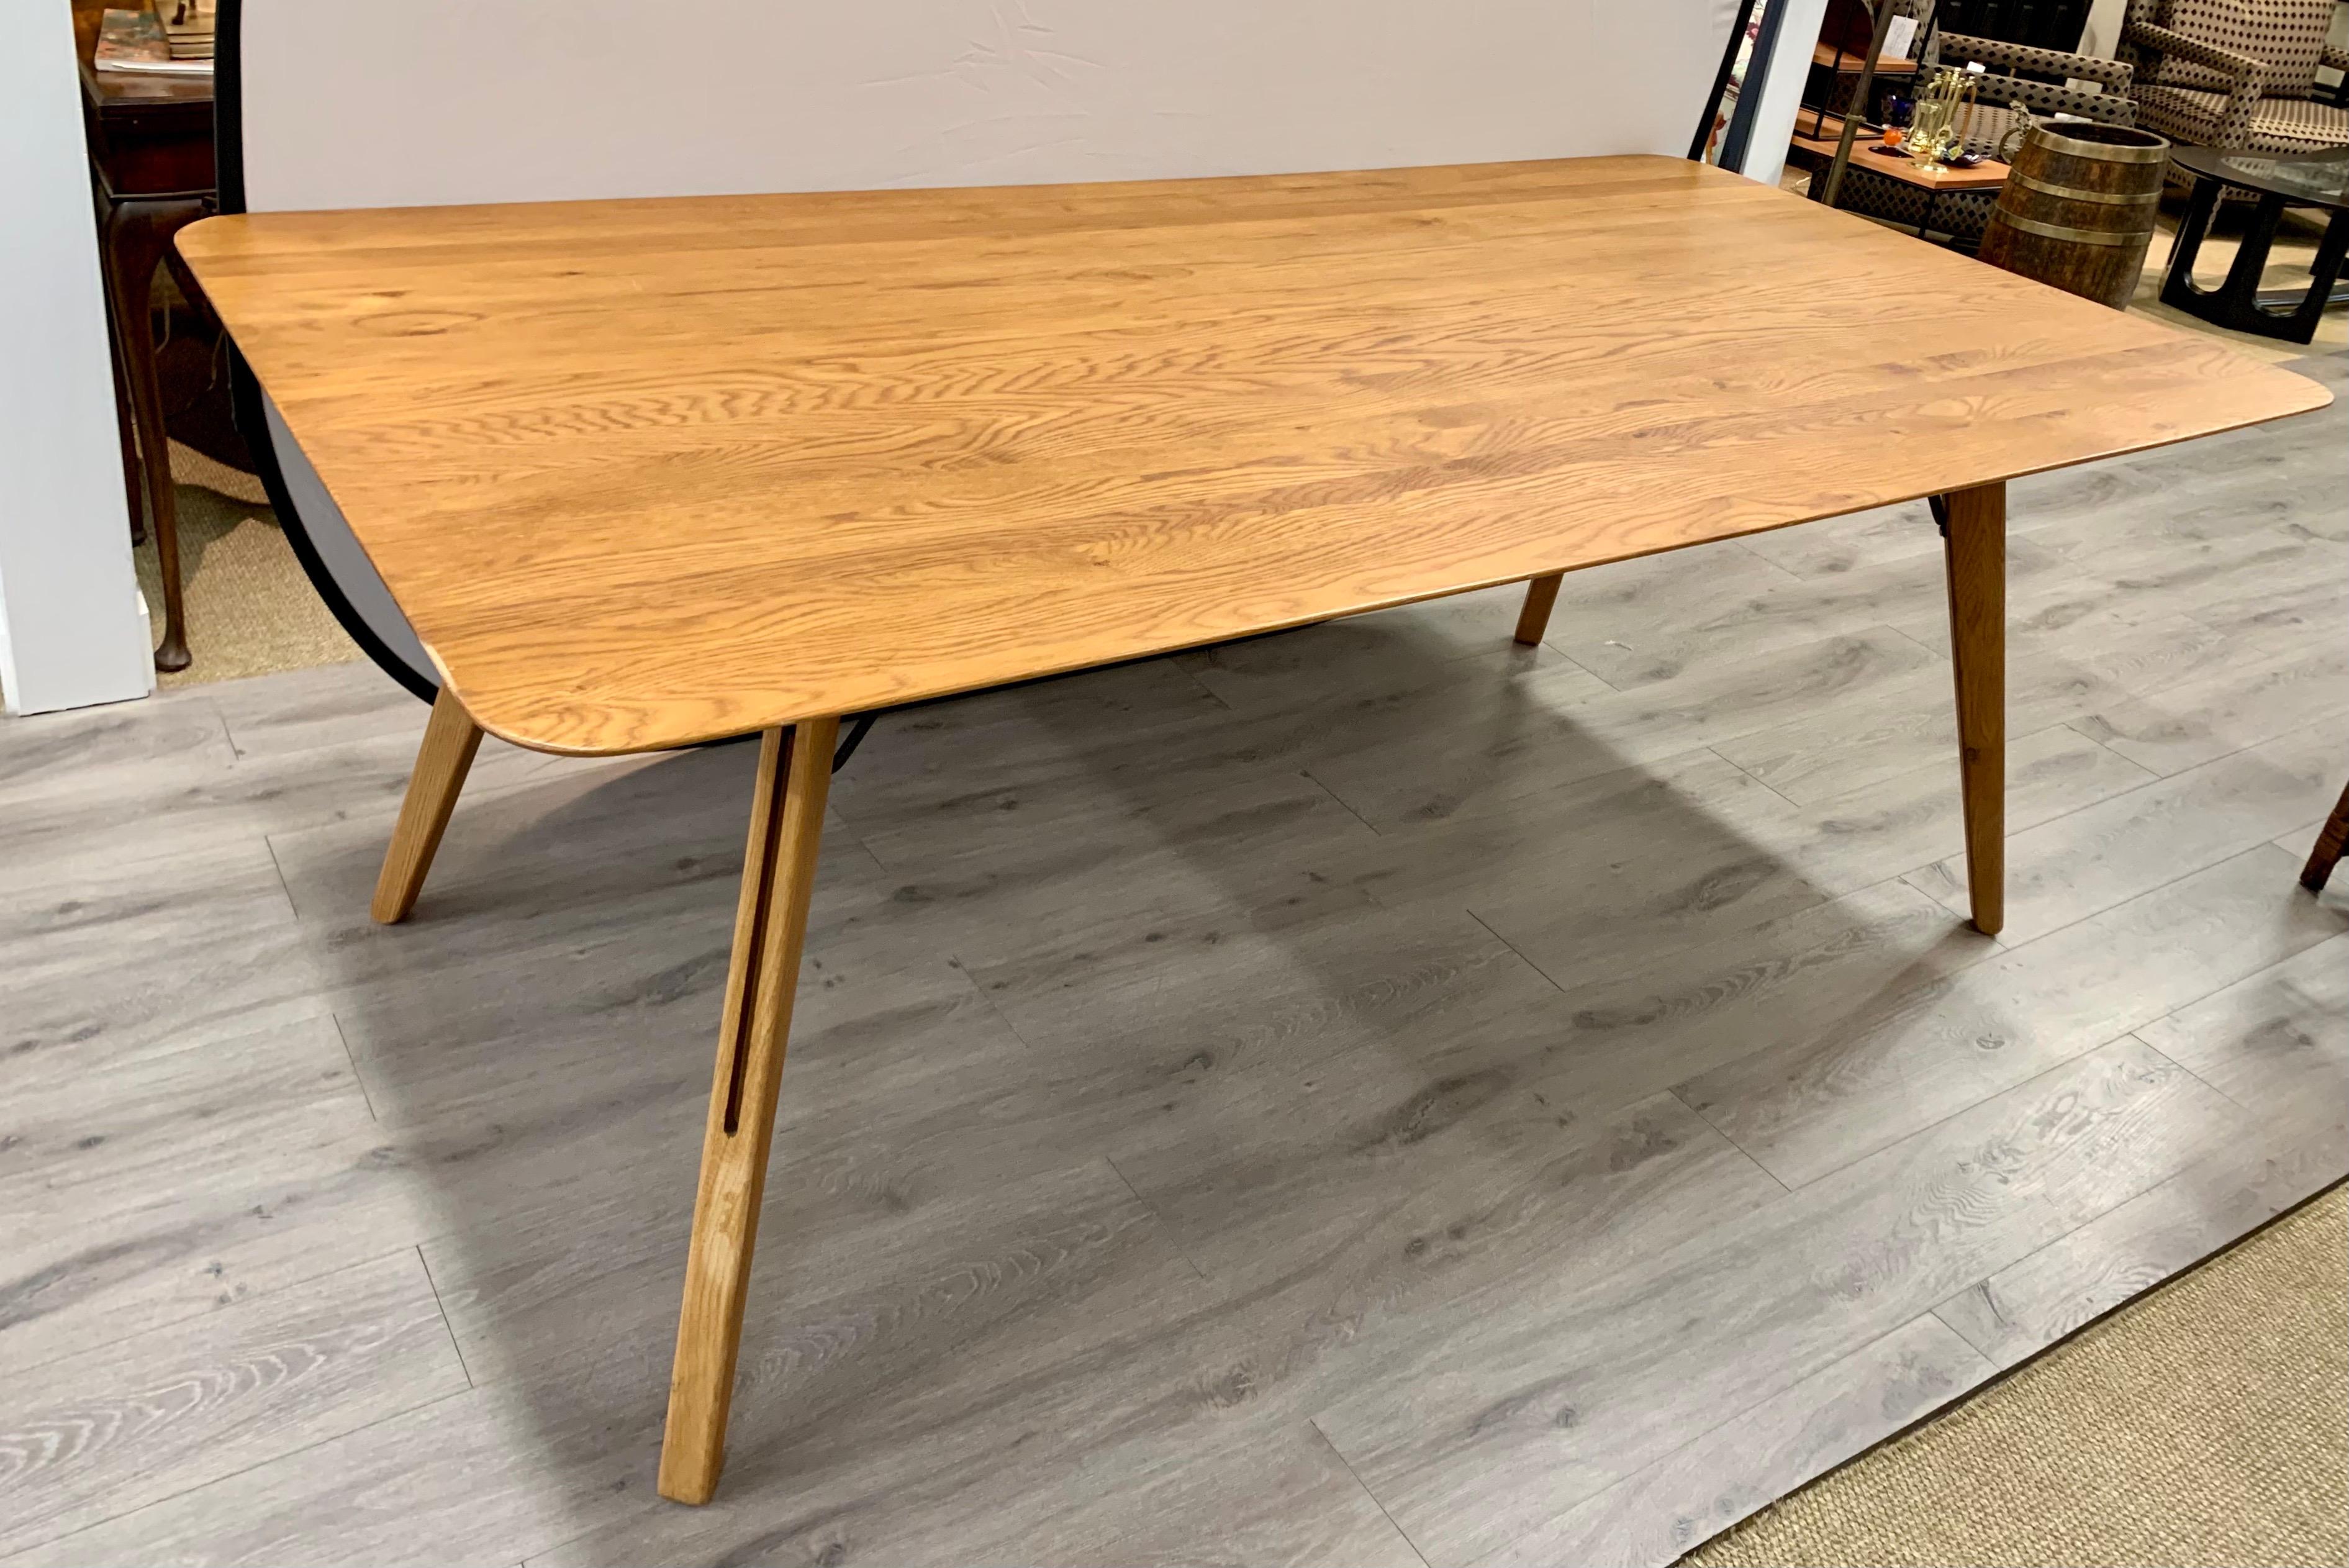 Iconic Danish modern sleek oak dining table with great scale and better lines.
Multi-purpose - can be used as a writing table too. Now more than ever, home is where the heart is.